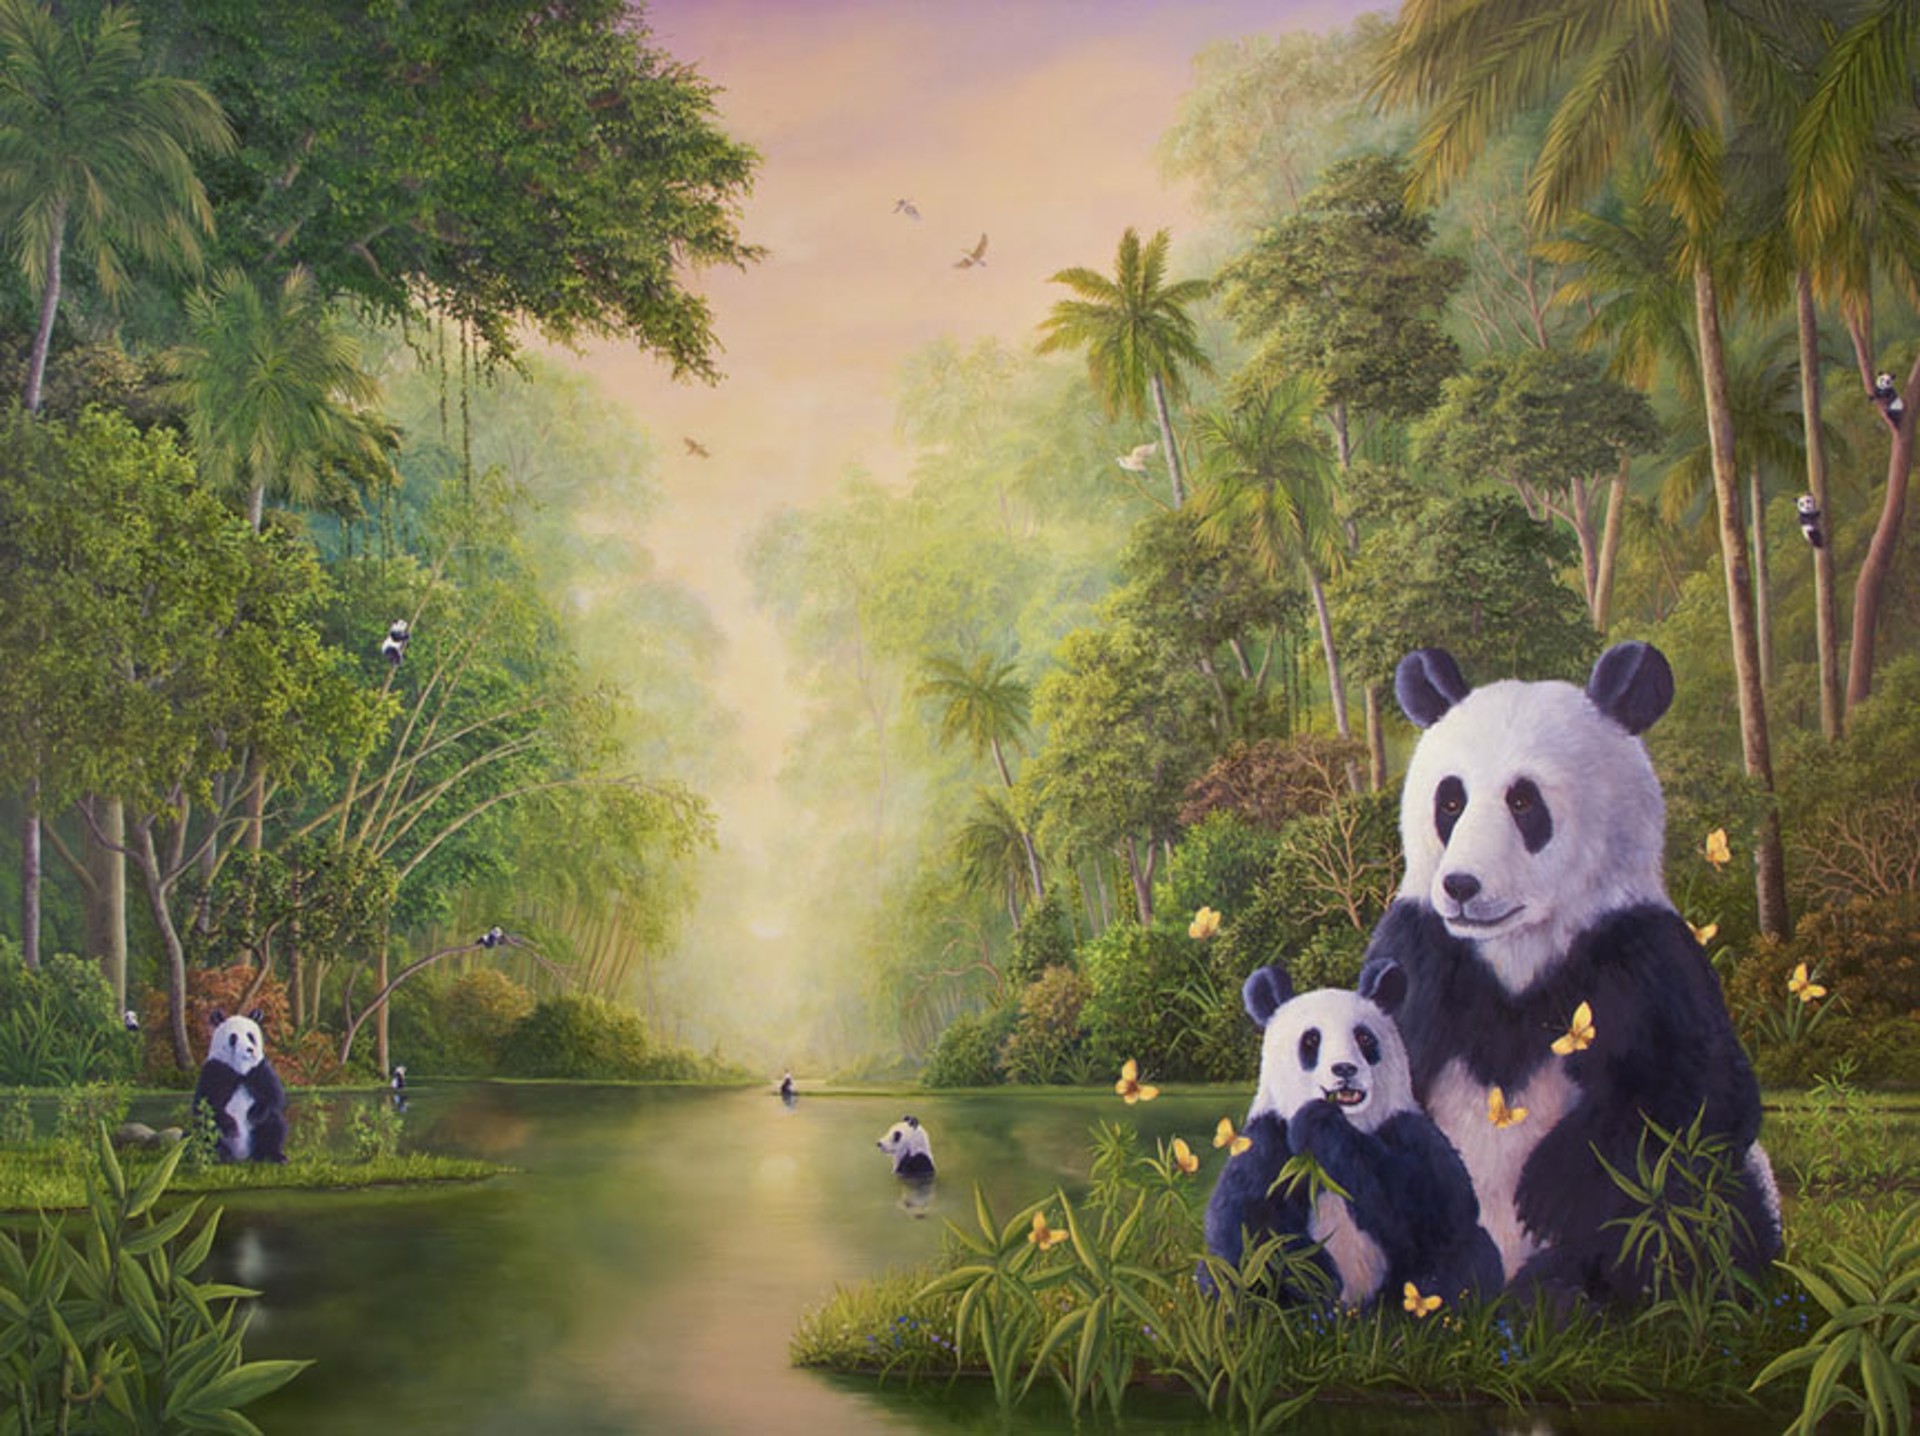 The Bamboo River by Robert Bissell